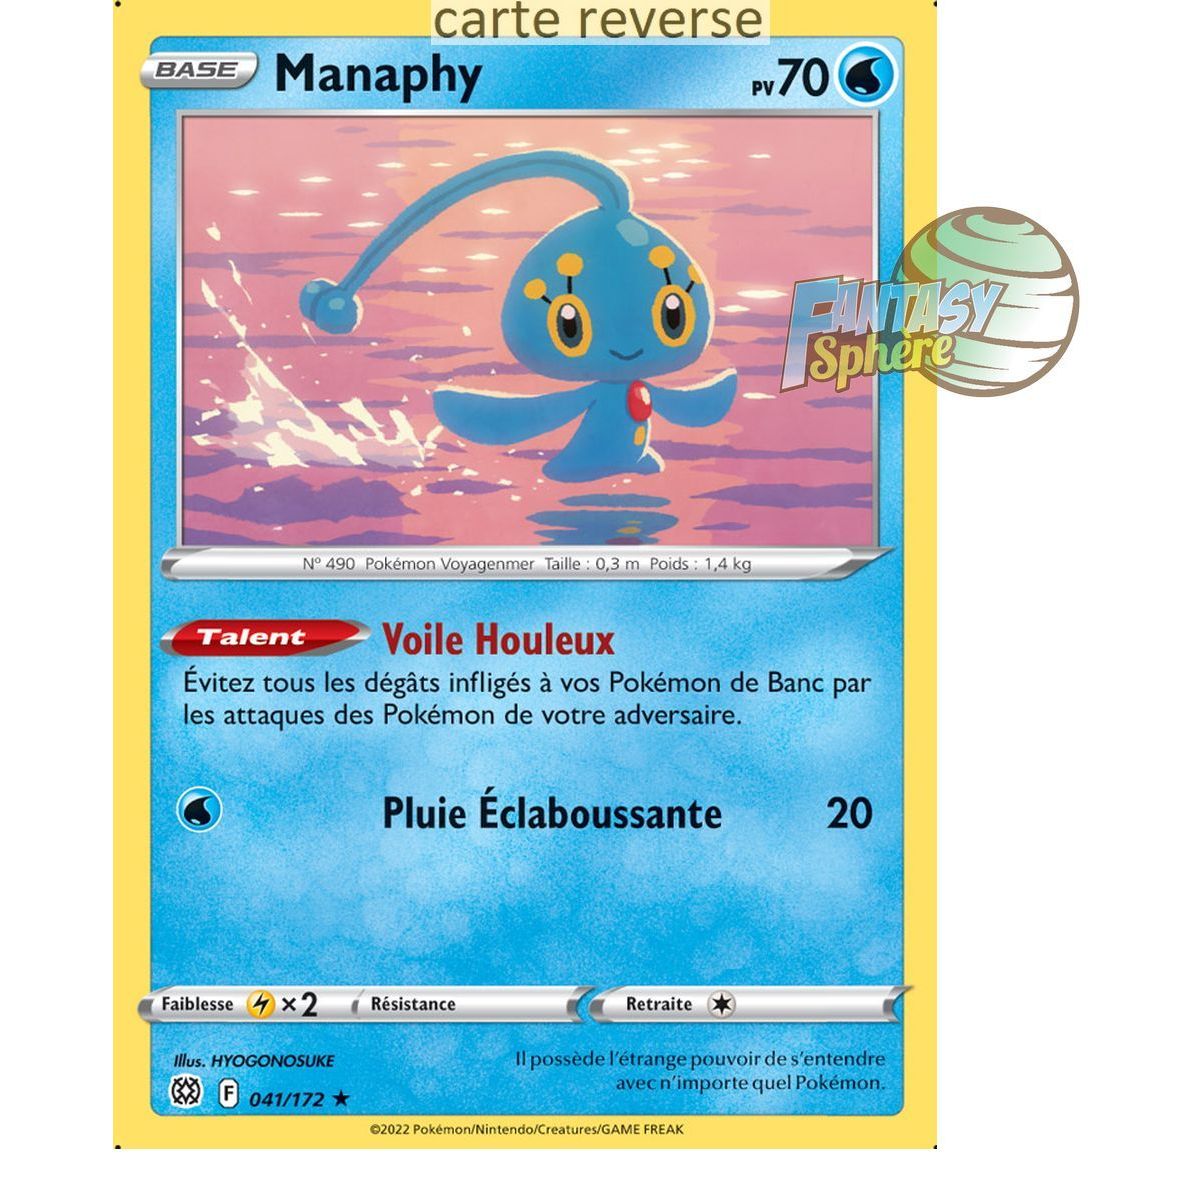 Manaphy - Reverse 41/172 - Sword and Shield 9 Sparkling Stars